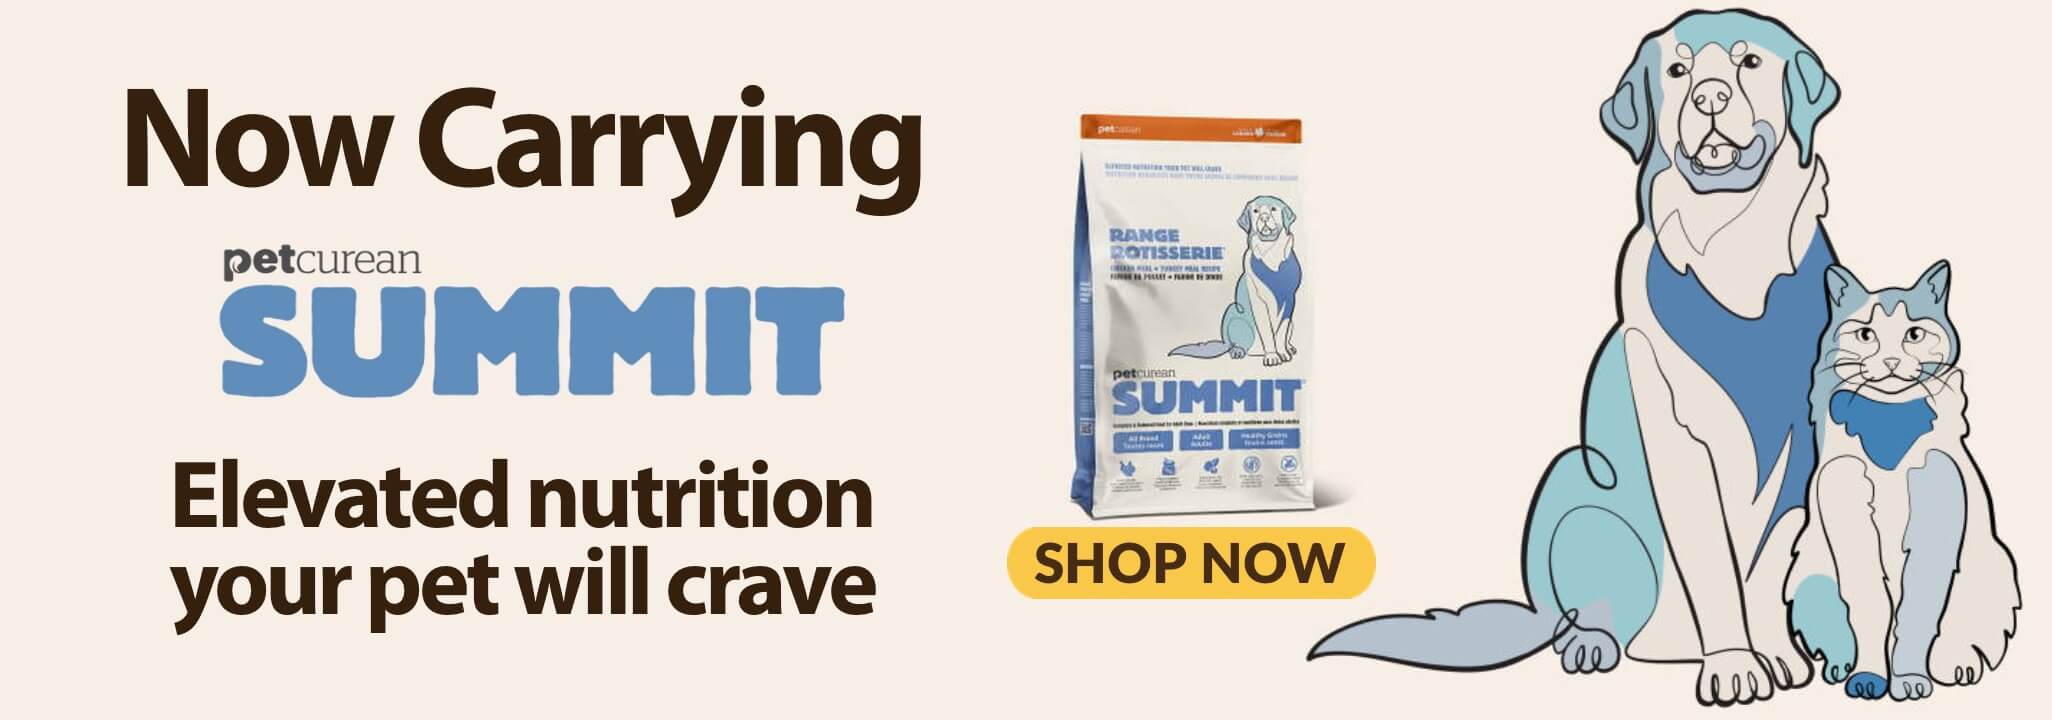 Now Carrying Summit Elevated nutrition your pet will crave Shop Now